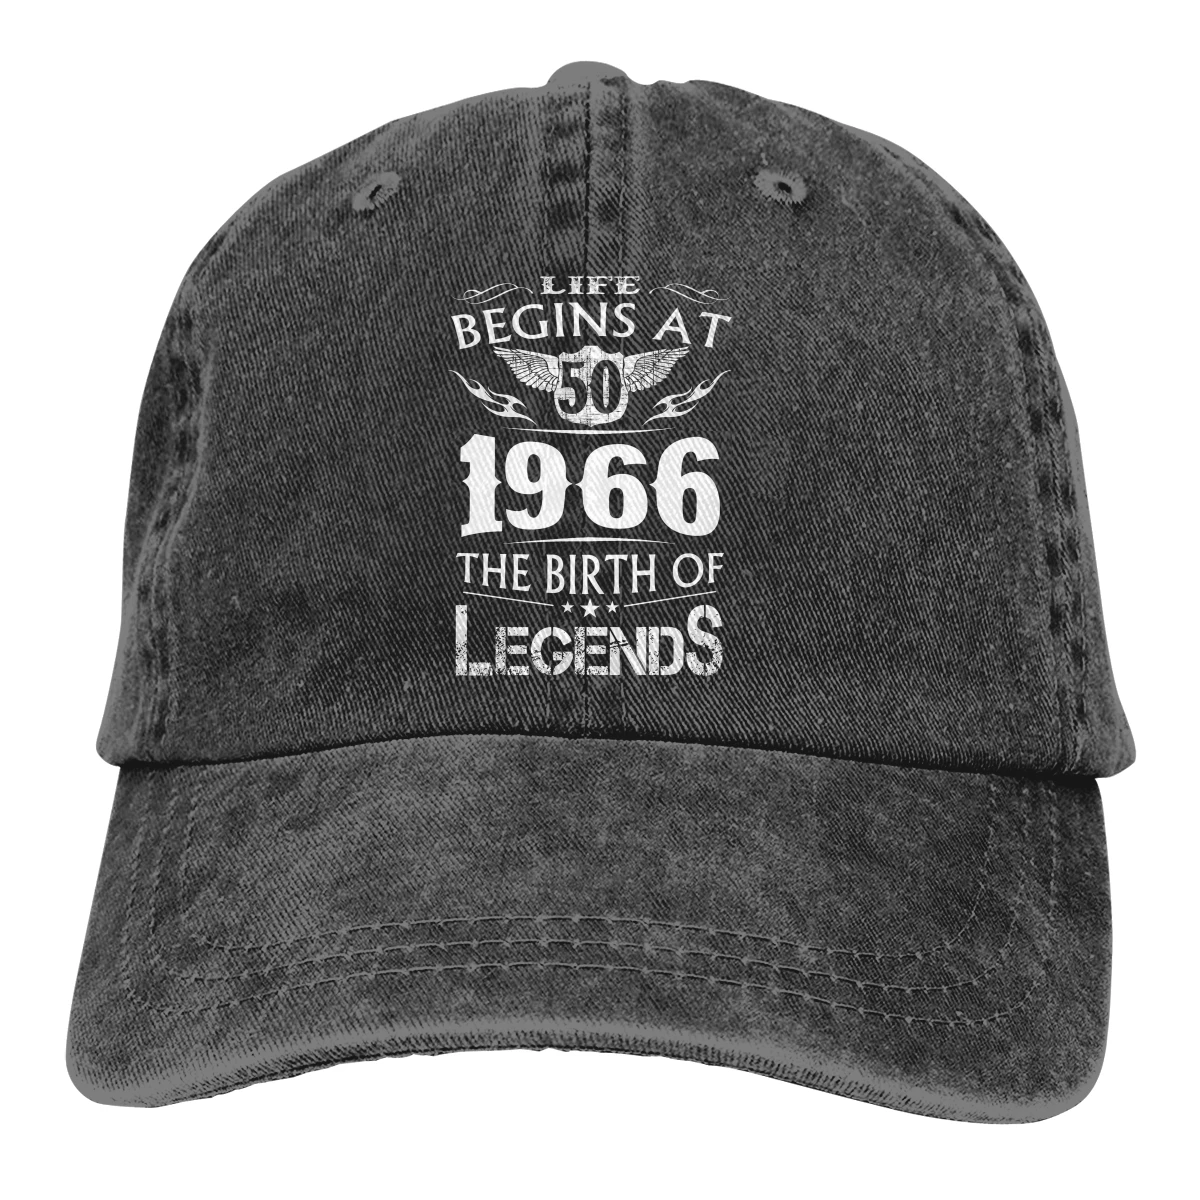 

Life Begins At 50 - 1966 The Birth Of Legends Baseball Cap Men 50 Years Old Born in 1971 Caps colors Women Summer Snapback Caps